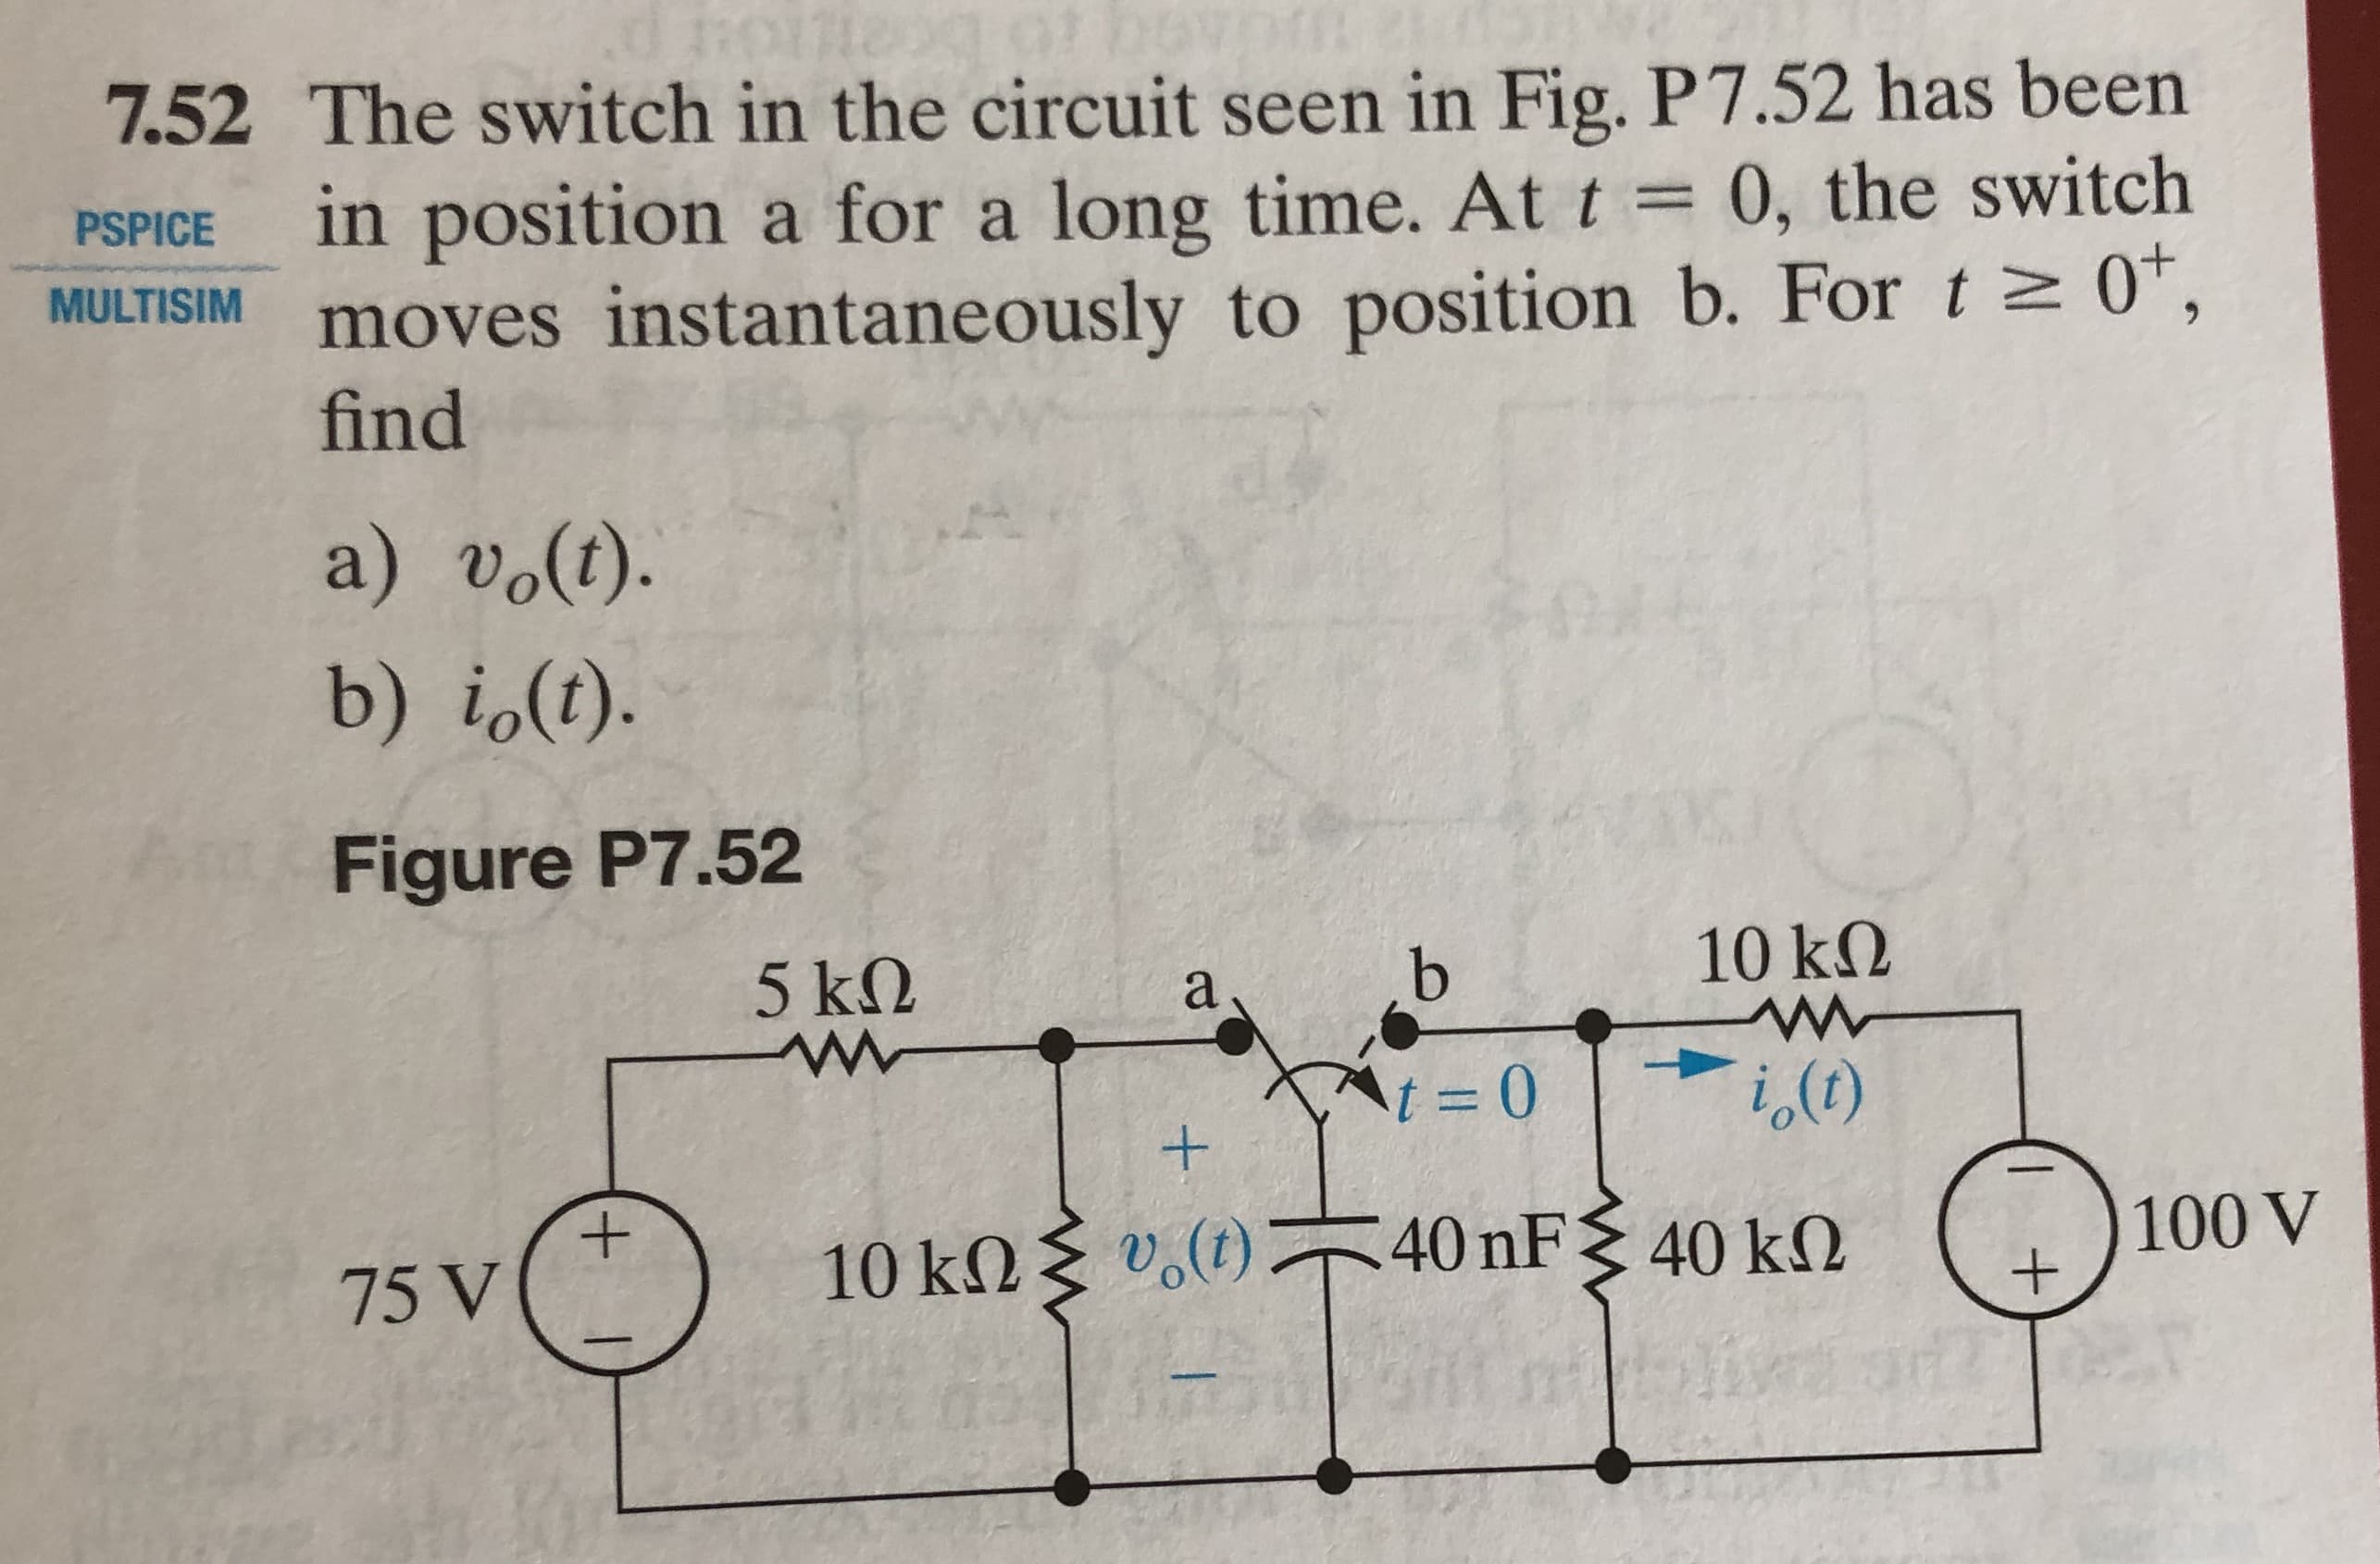 7.52 The switch in the circuit seen in Fig. P7.52 has been
PSPICE in position a for a long time. At t0, the switch
MULTISIM moves instantaneously to position b. For 0,
find
a) vo(t).
b) io1).
Figure P7.52
10 kΩ
40 nF
10()
40 kΩ
10 k()
75 V
